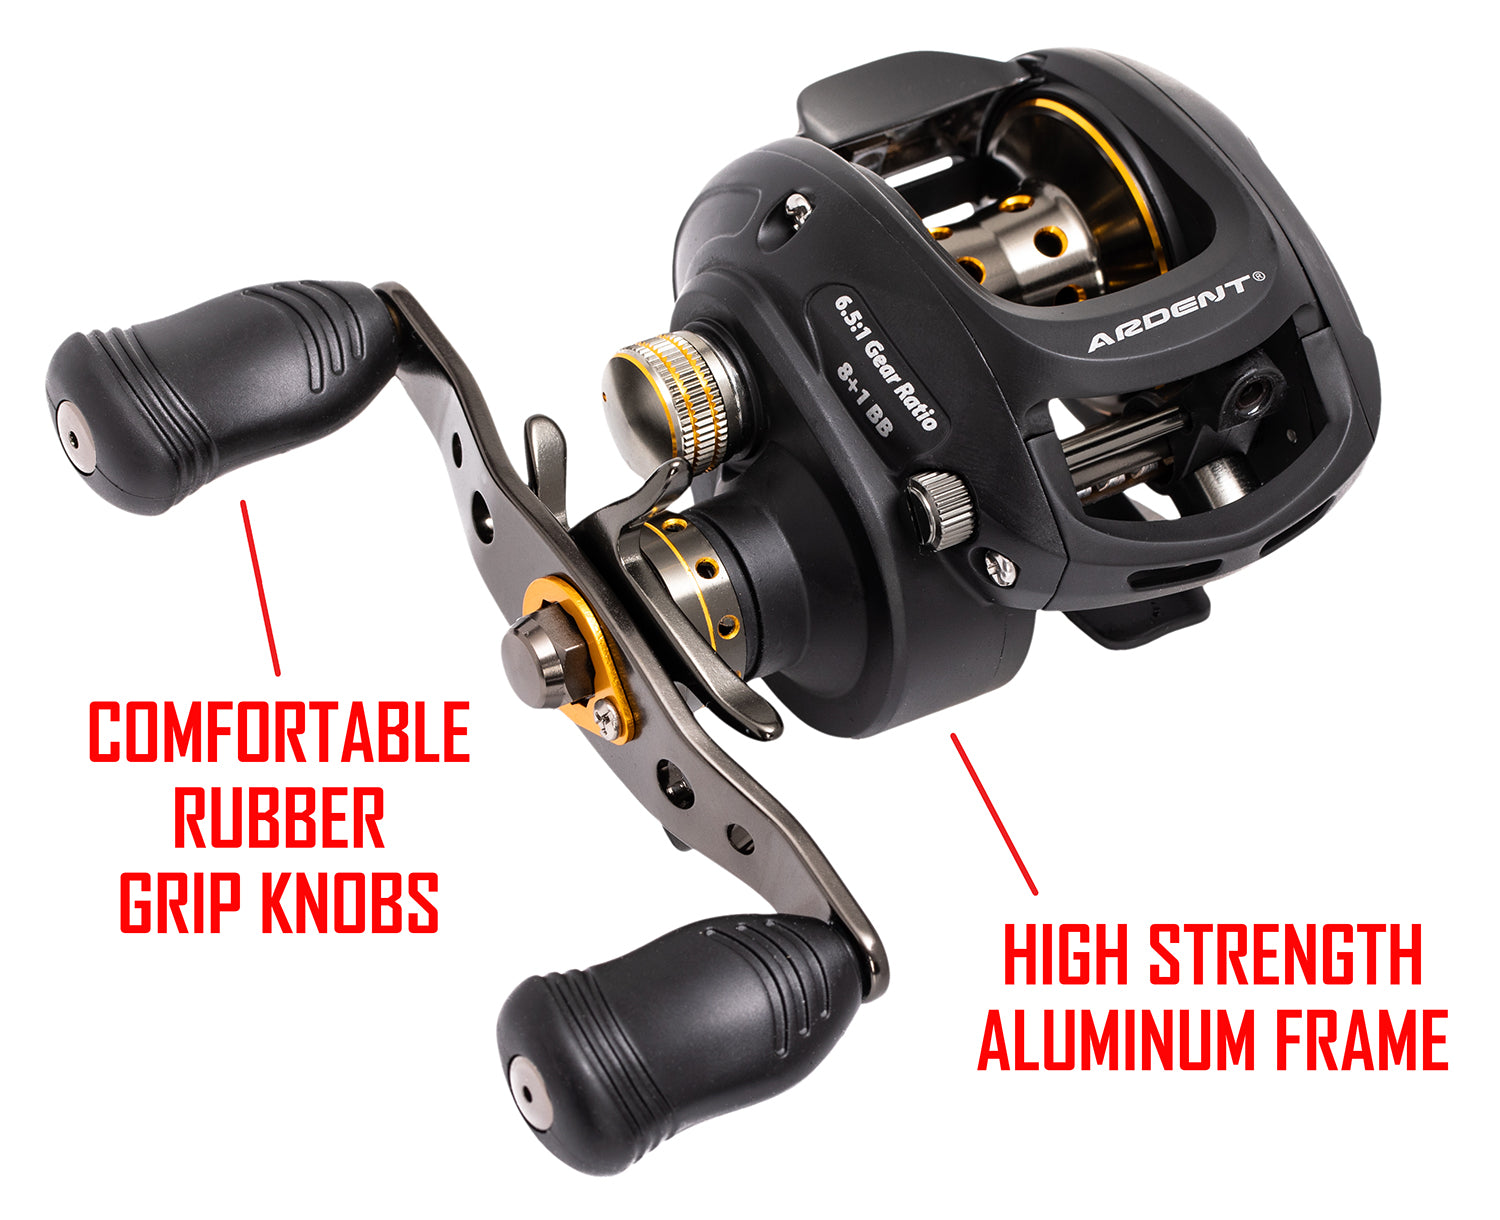 Black APEX TOURNAMENT Baitcaster with red text. text: COMFORTABLE RUBBER GRIP KNOBS HIGH STRENGTH ALUMINUM FRAME